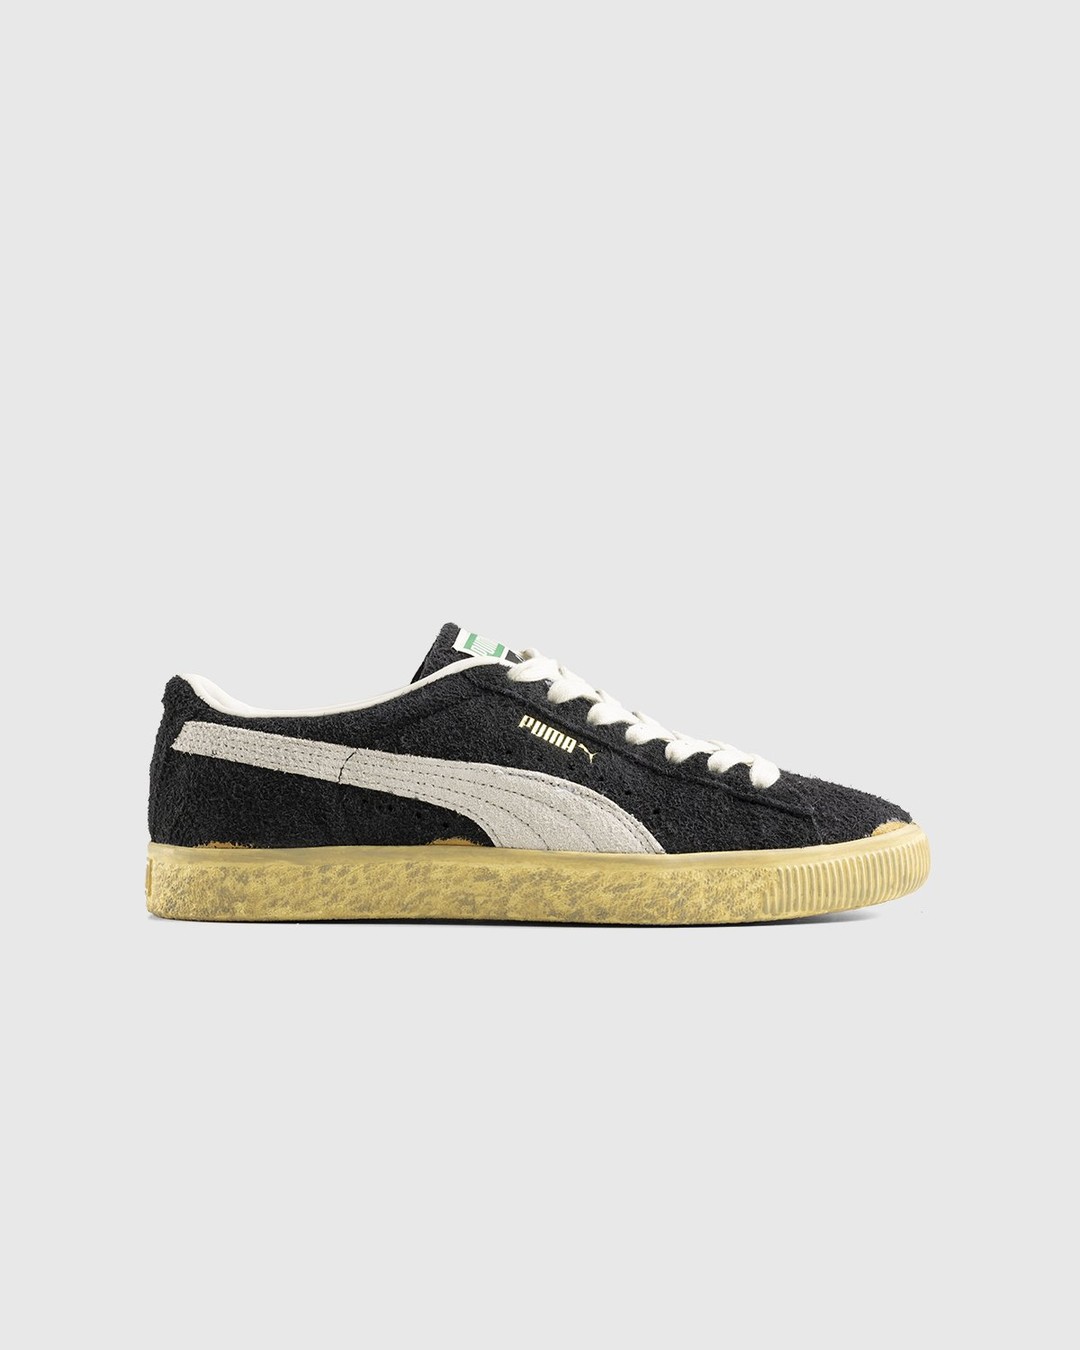 Puma – Suede Vintage The Never Worn Black White - Sneakers - Black - Image 1